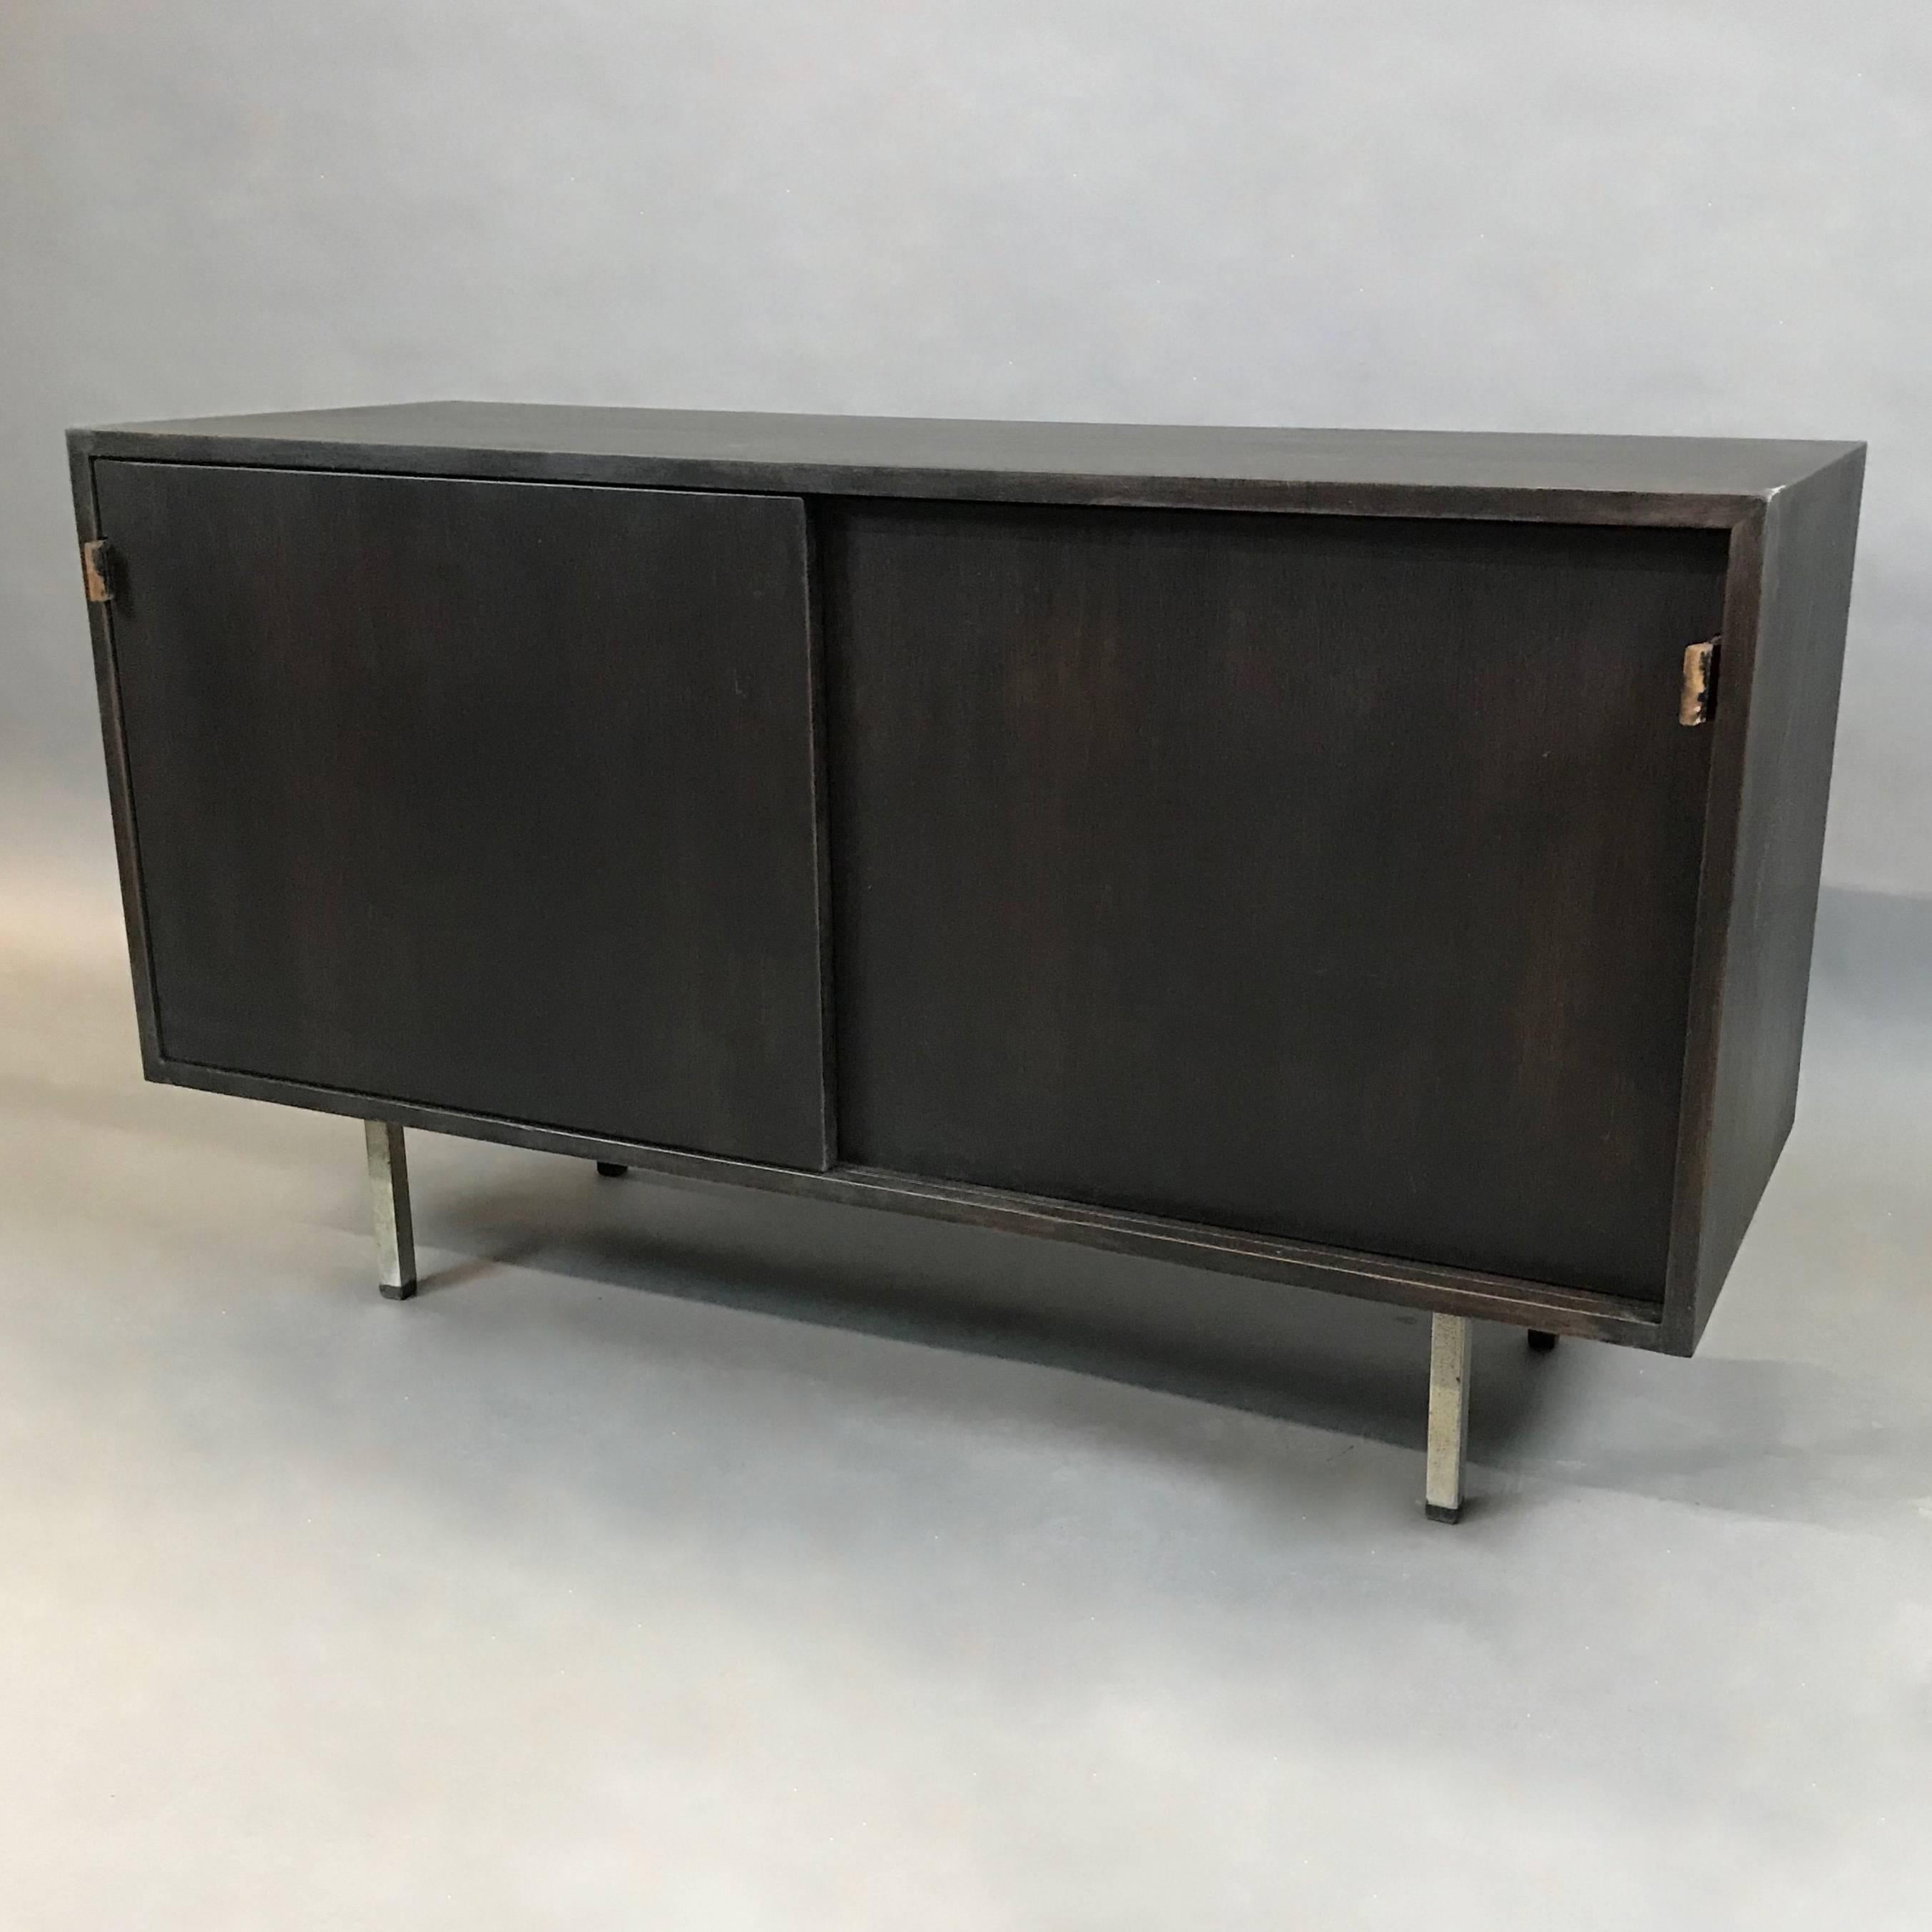 Early credenza or media cabinet by Florence Knoll features an ebonized walnut body, chrome legs, original leather pulls and sectioned interior: 22.75in w / 5.5in w / 16.5in with adjustable and pull out shelves.